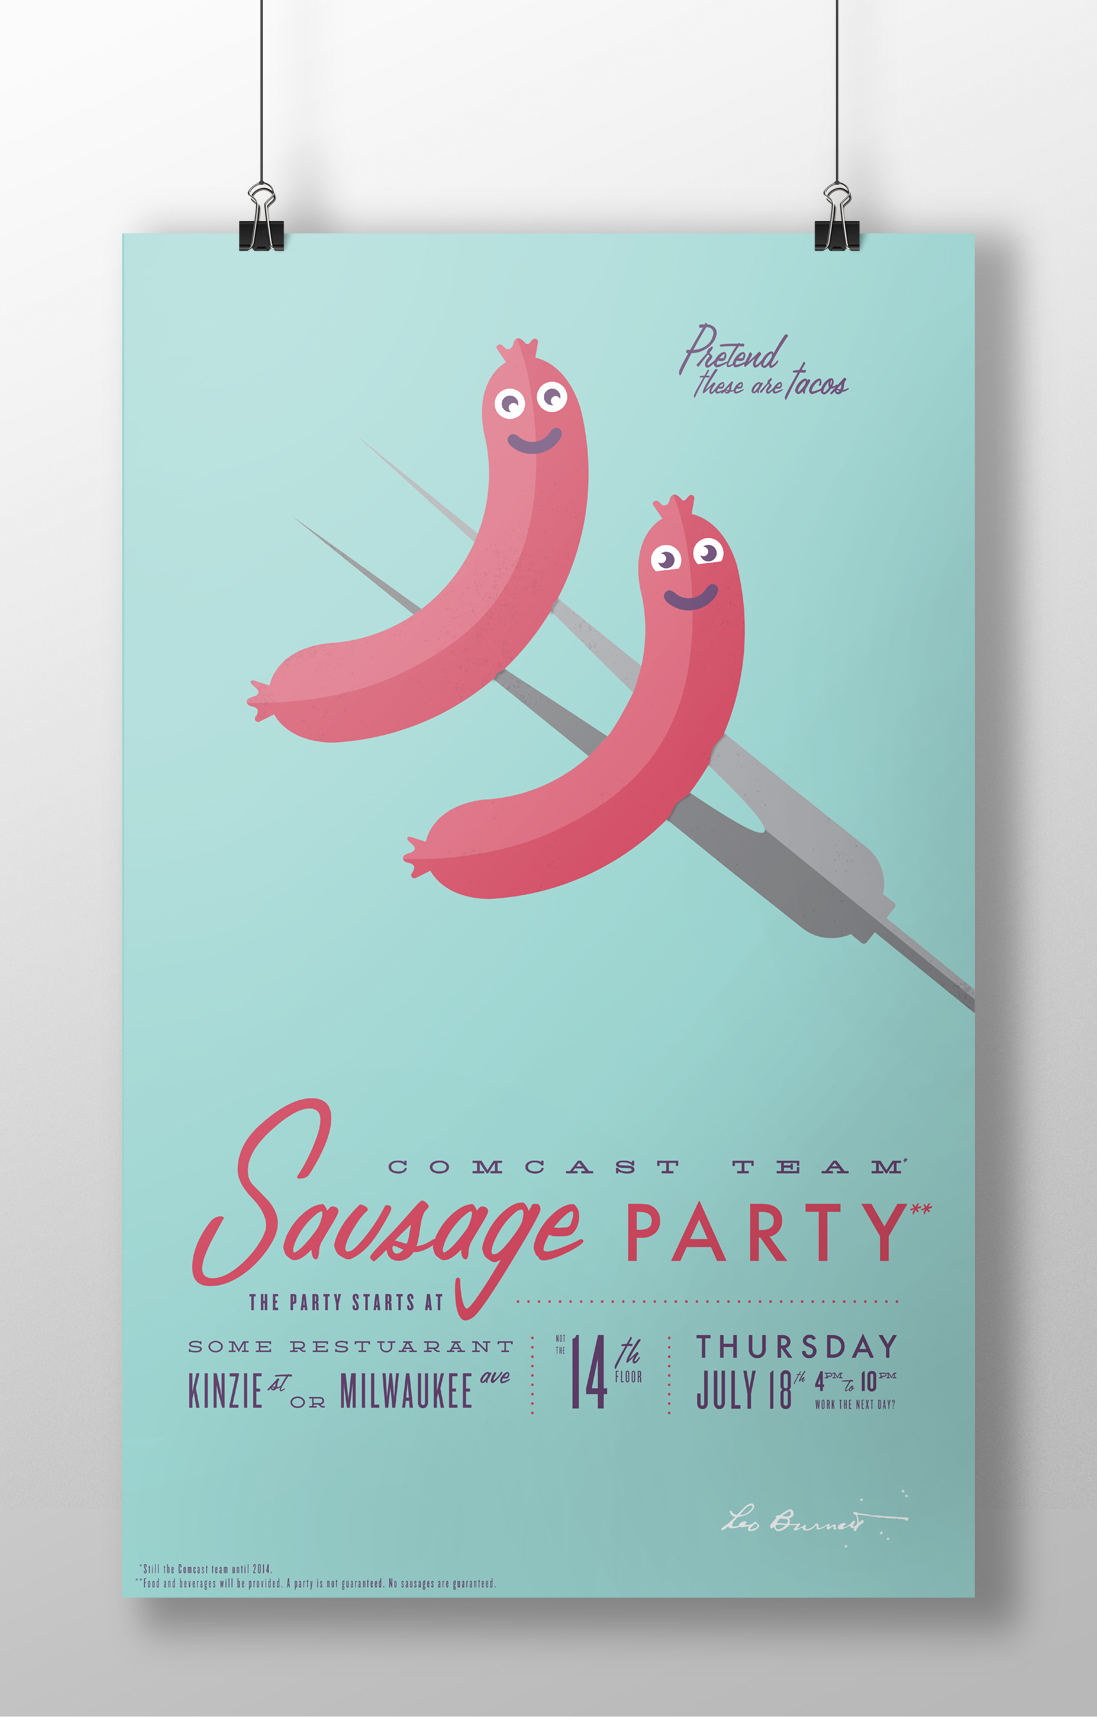 Adobe Portfolio party Work  Event sausage booze whiseky apples candy corn Donuts Popsicles anthropormorphic Office